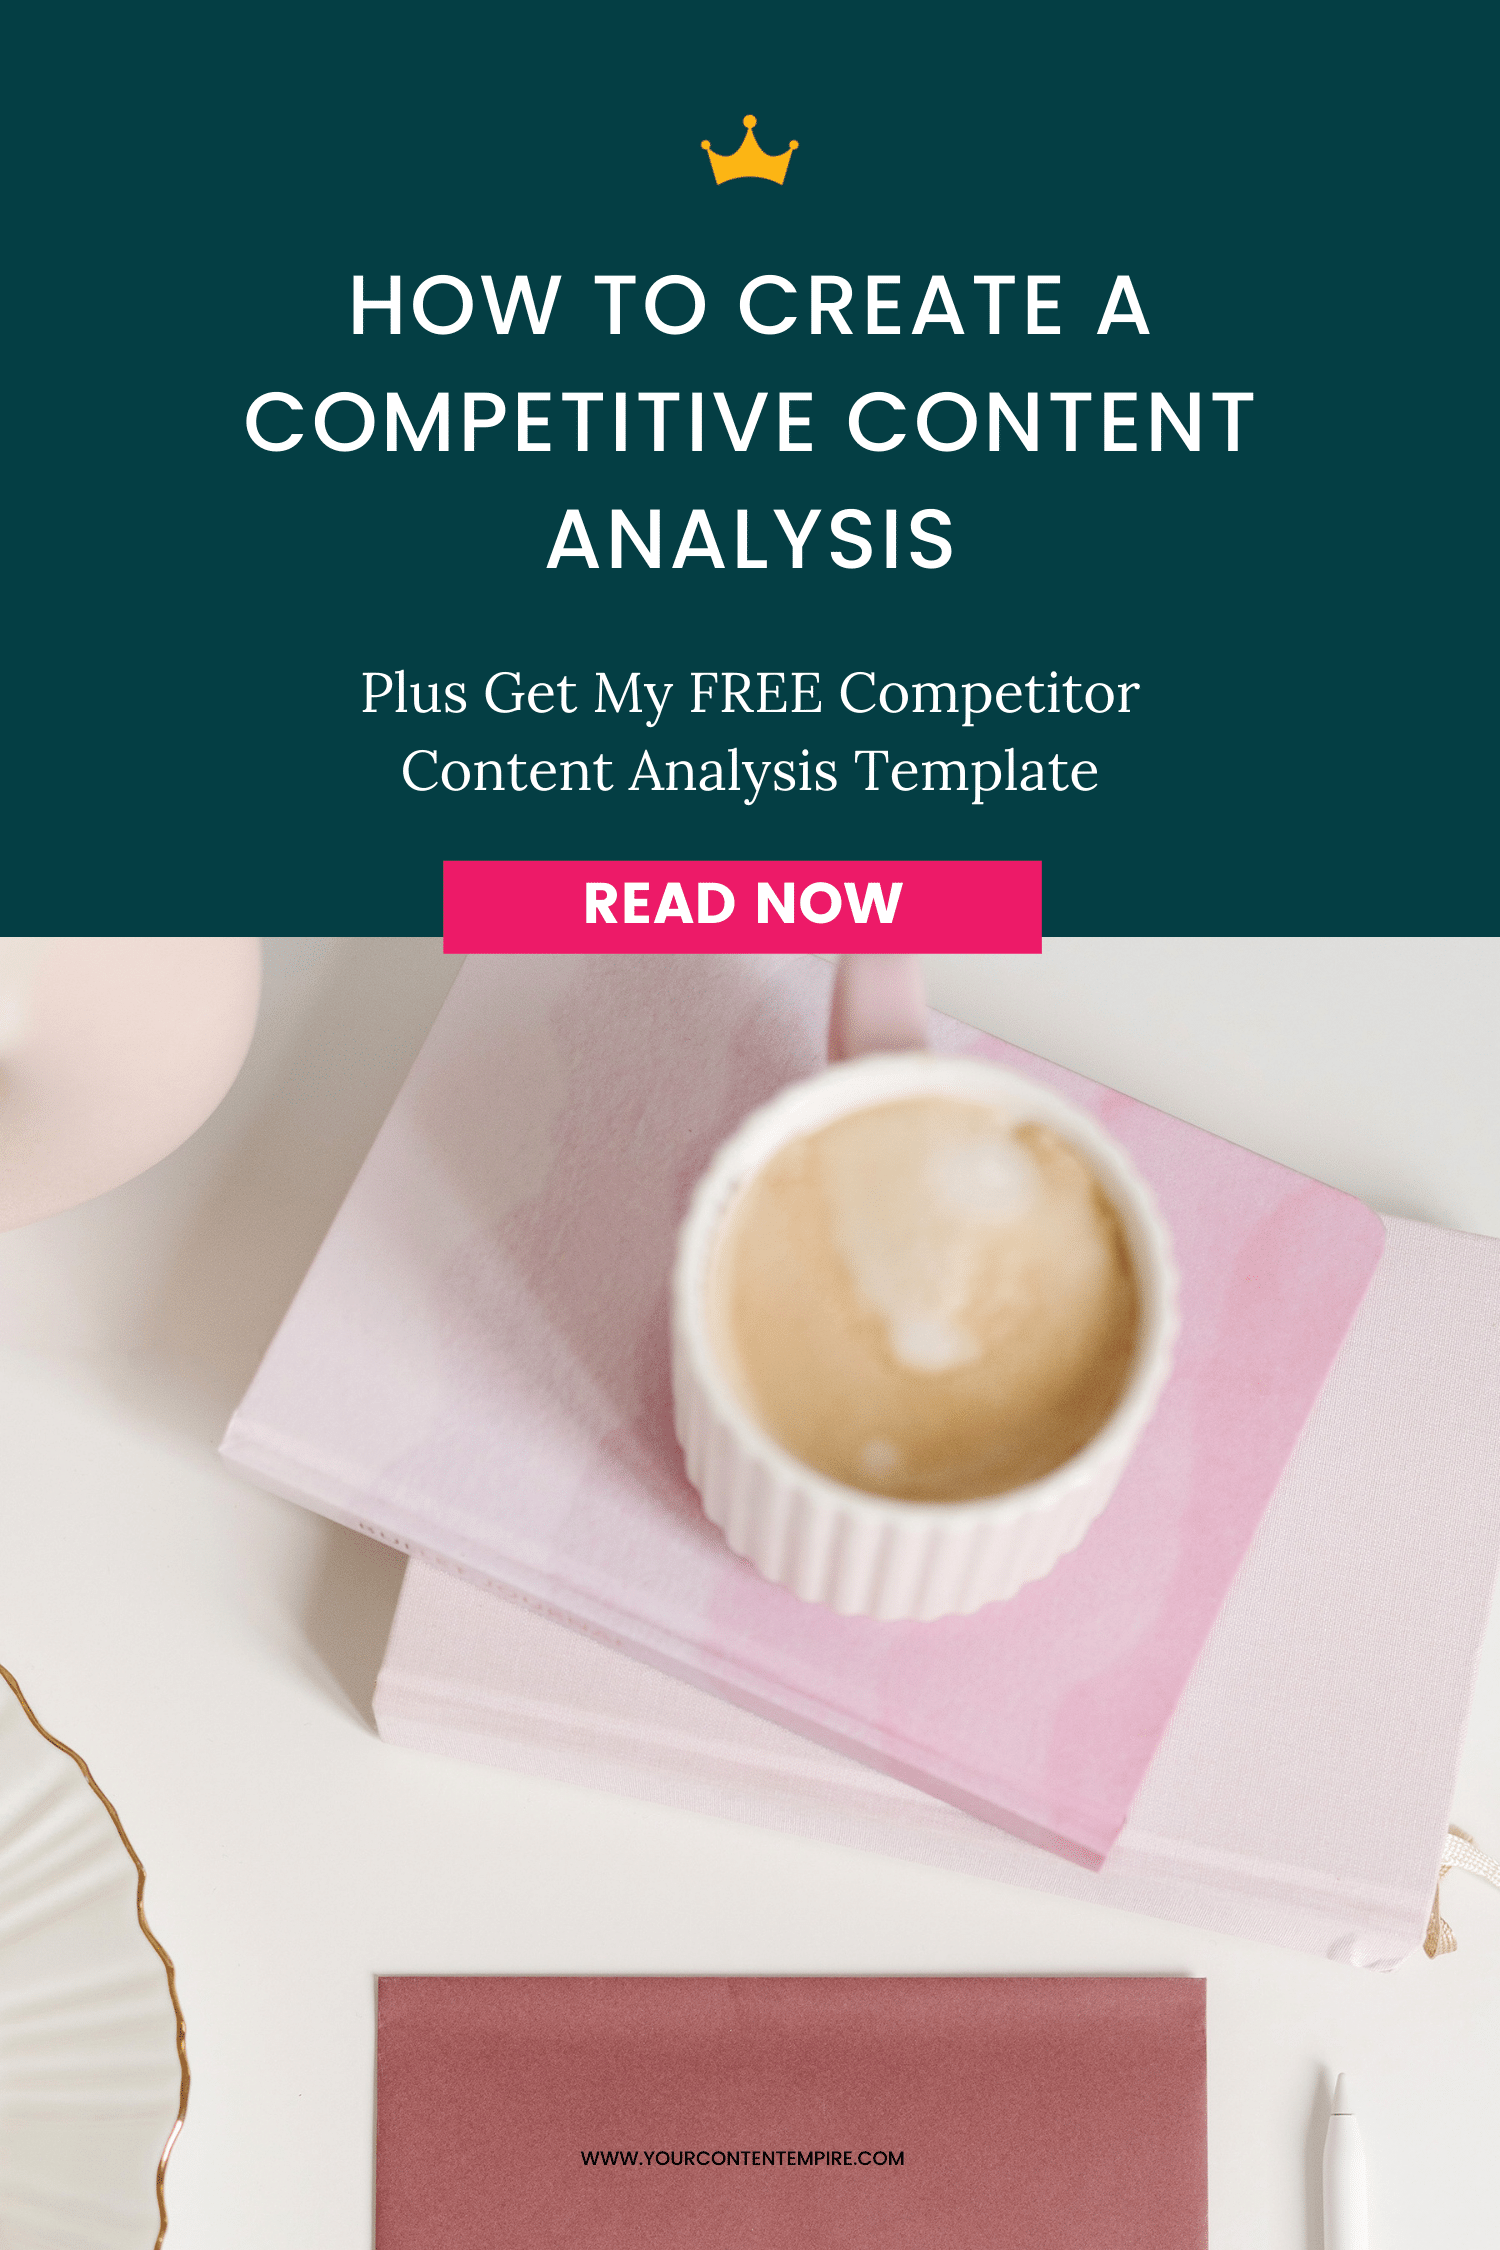 How to Create a Competitive Content Analysis